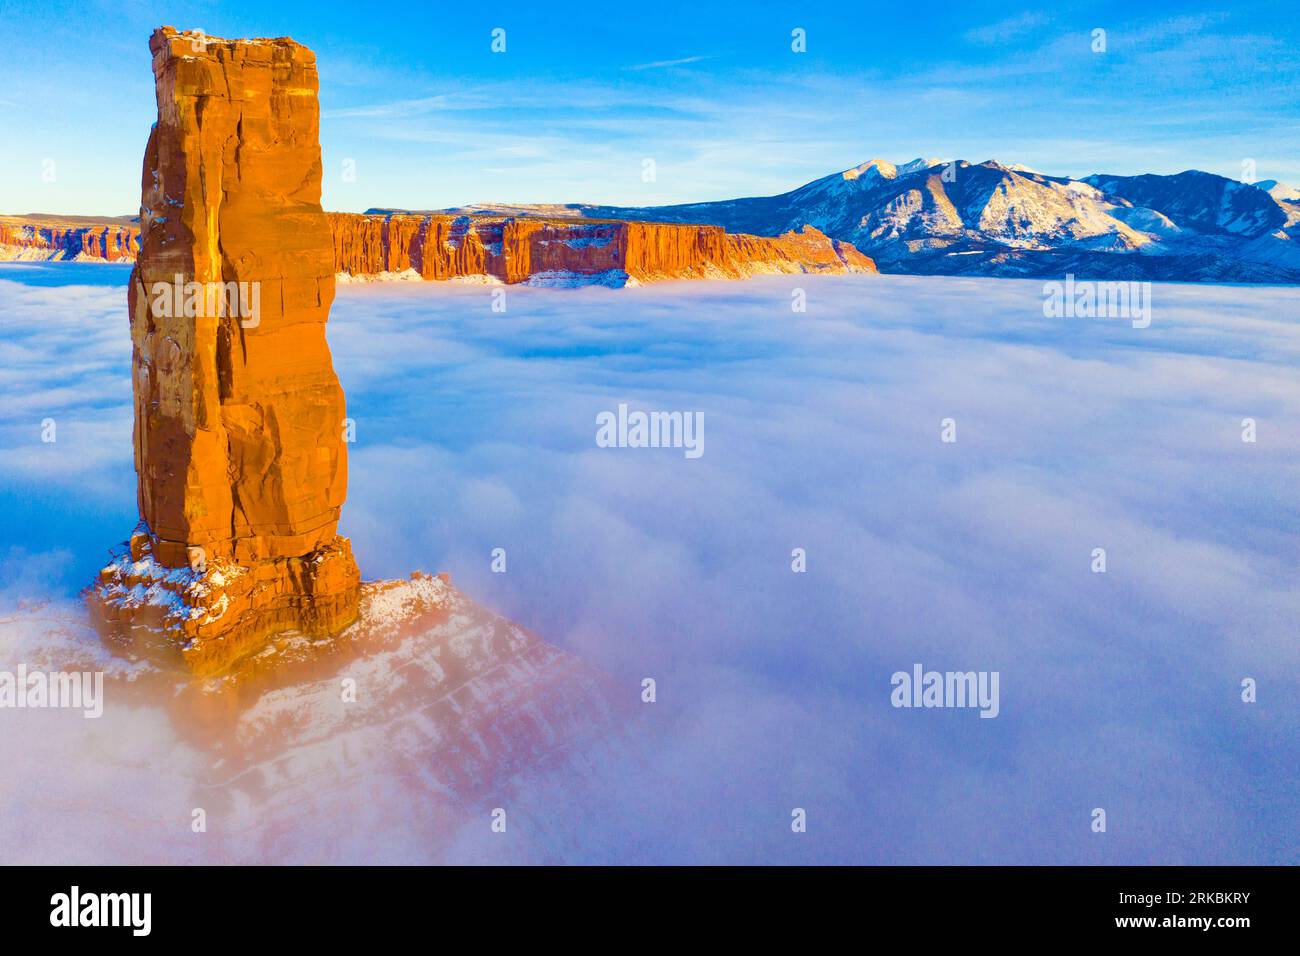 Castle Rock rises above winter fog, Castle Vallery Utah, Near Moab, Coloraod River, A 'glory' from sunlight on fog appears, Lqa Sal MOuntains beyond Stock Photo